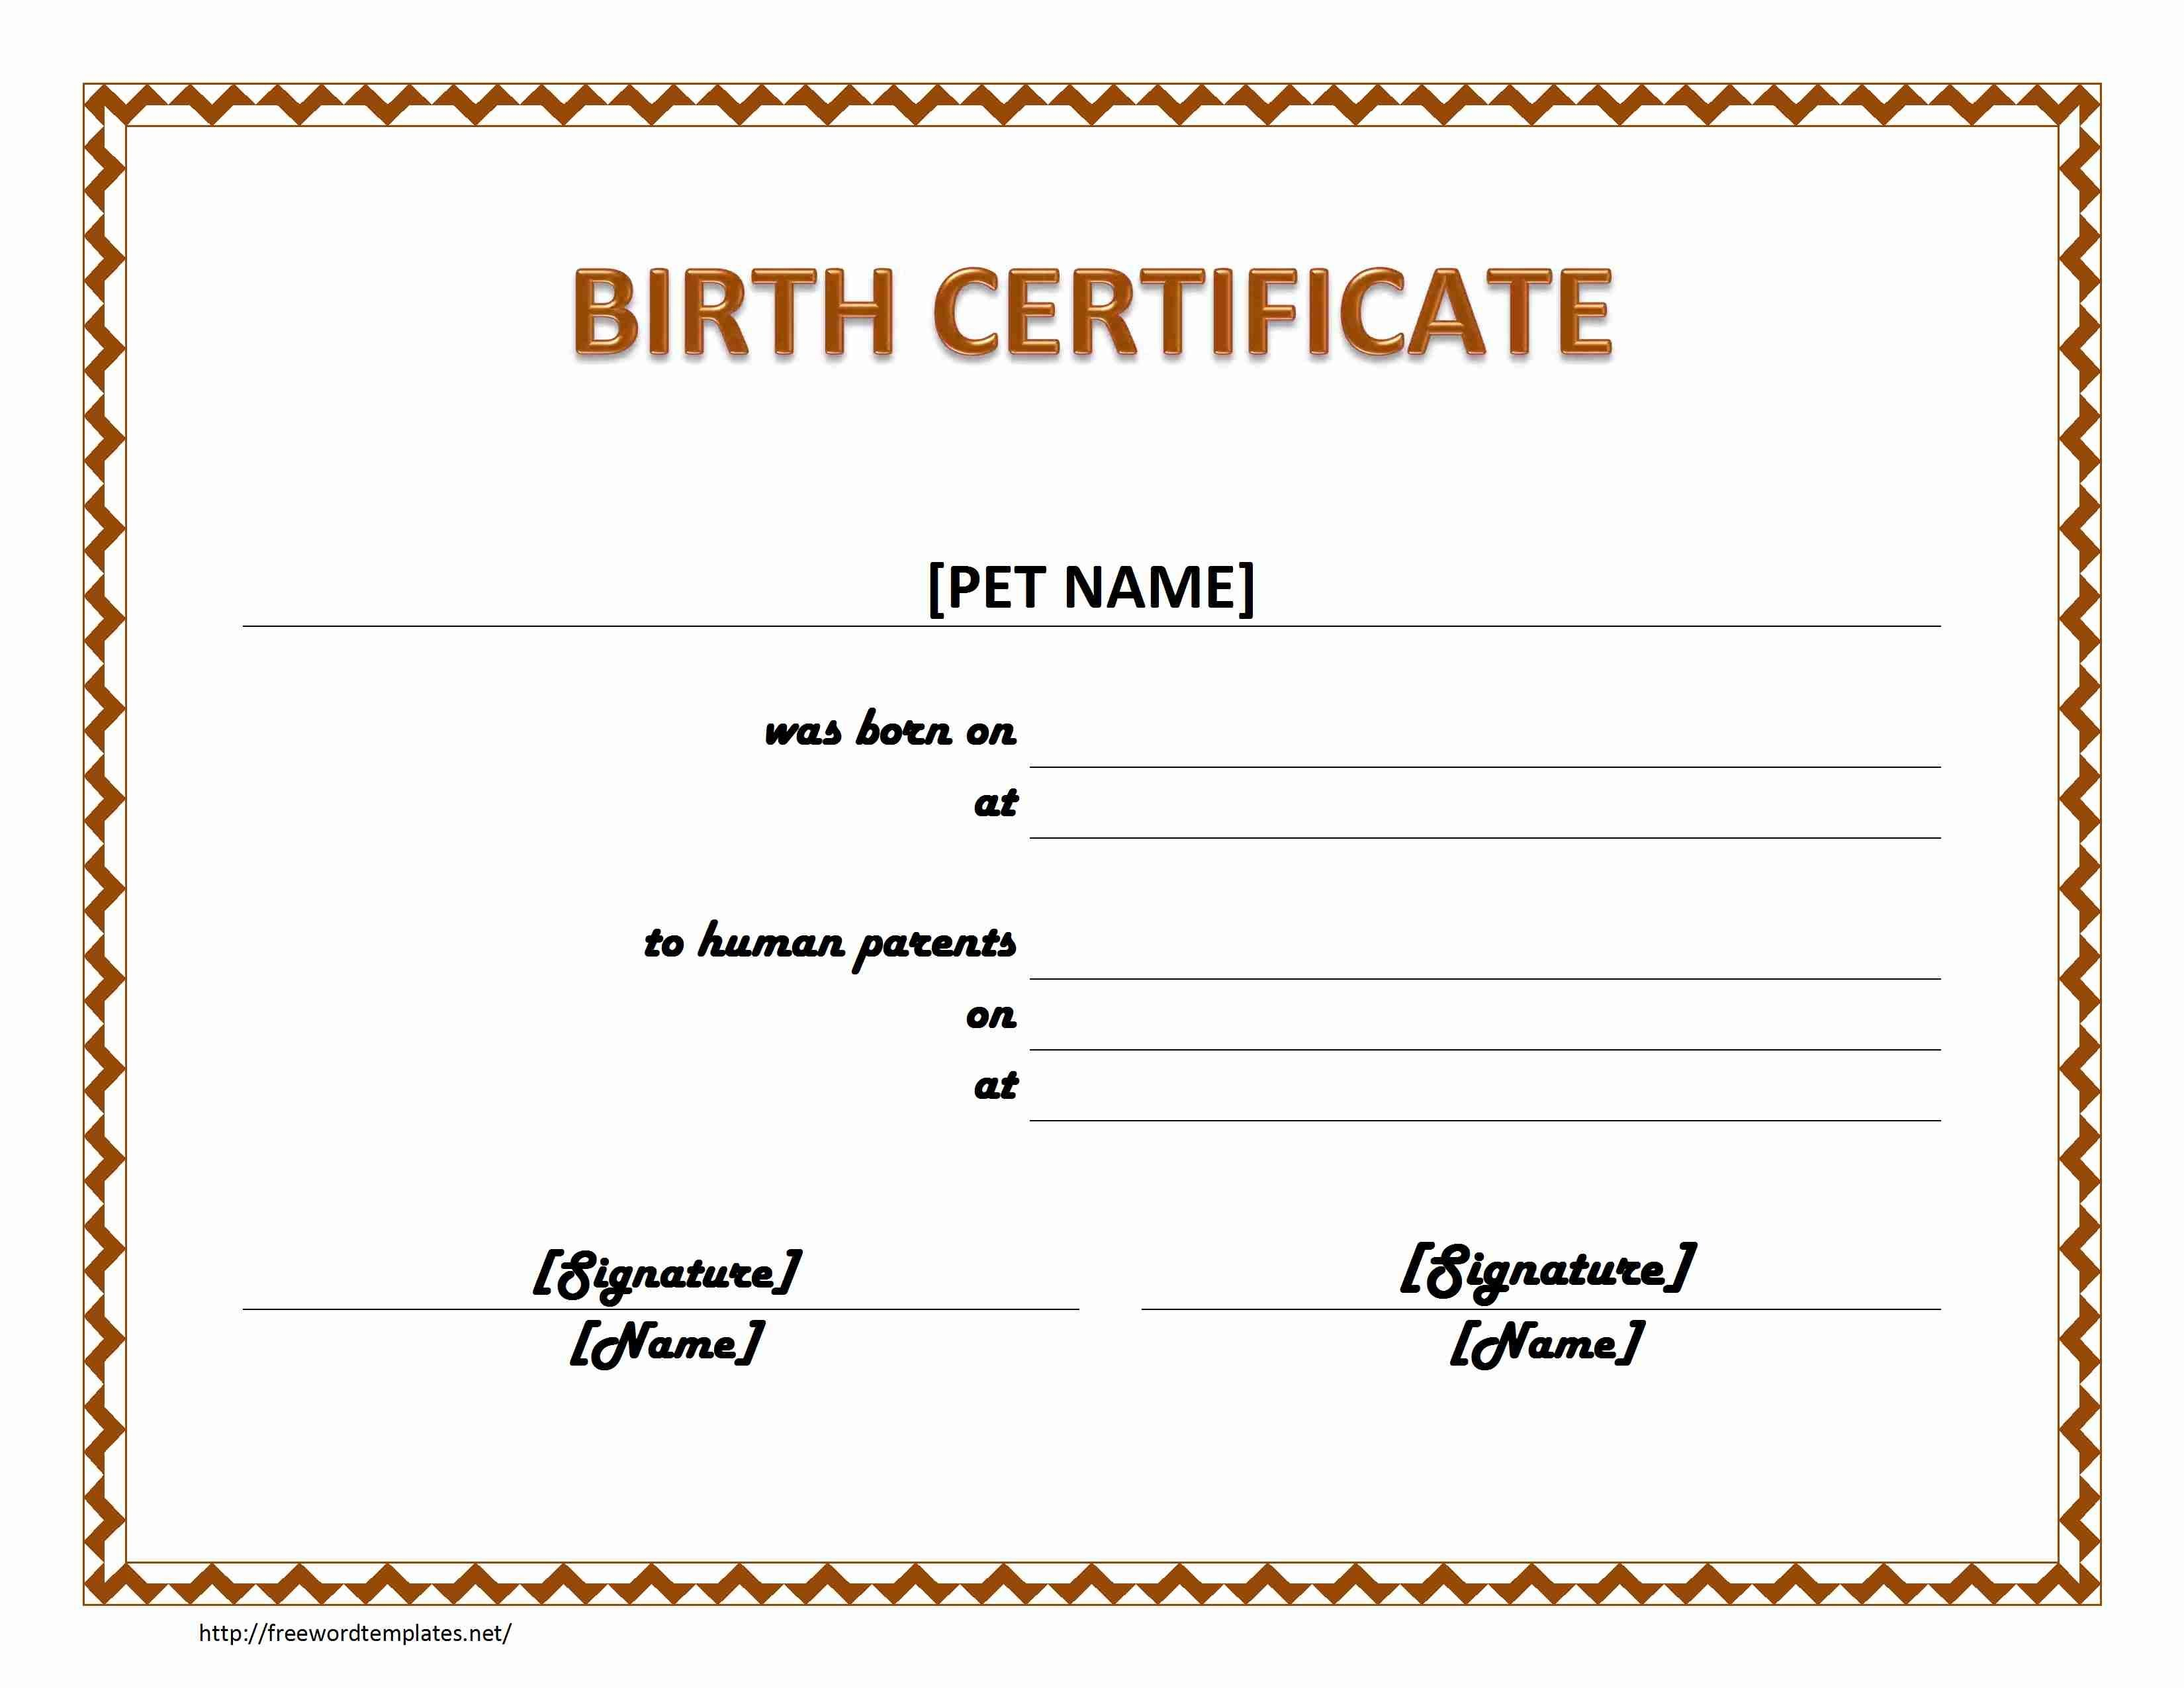 Pet Birth Certificate Maker  Pet Birth Certificate For Word  Puppy pertaining to Editable Birth Certificate Template